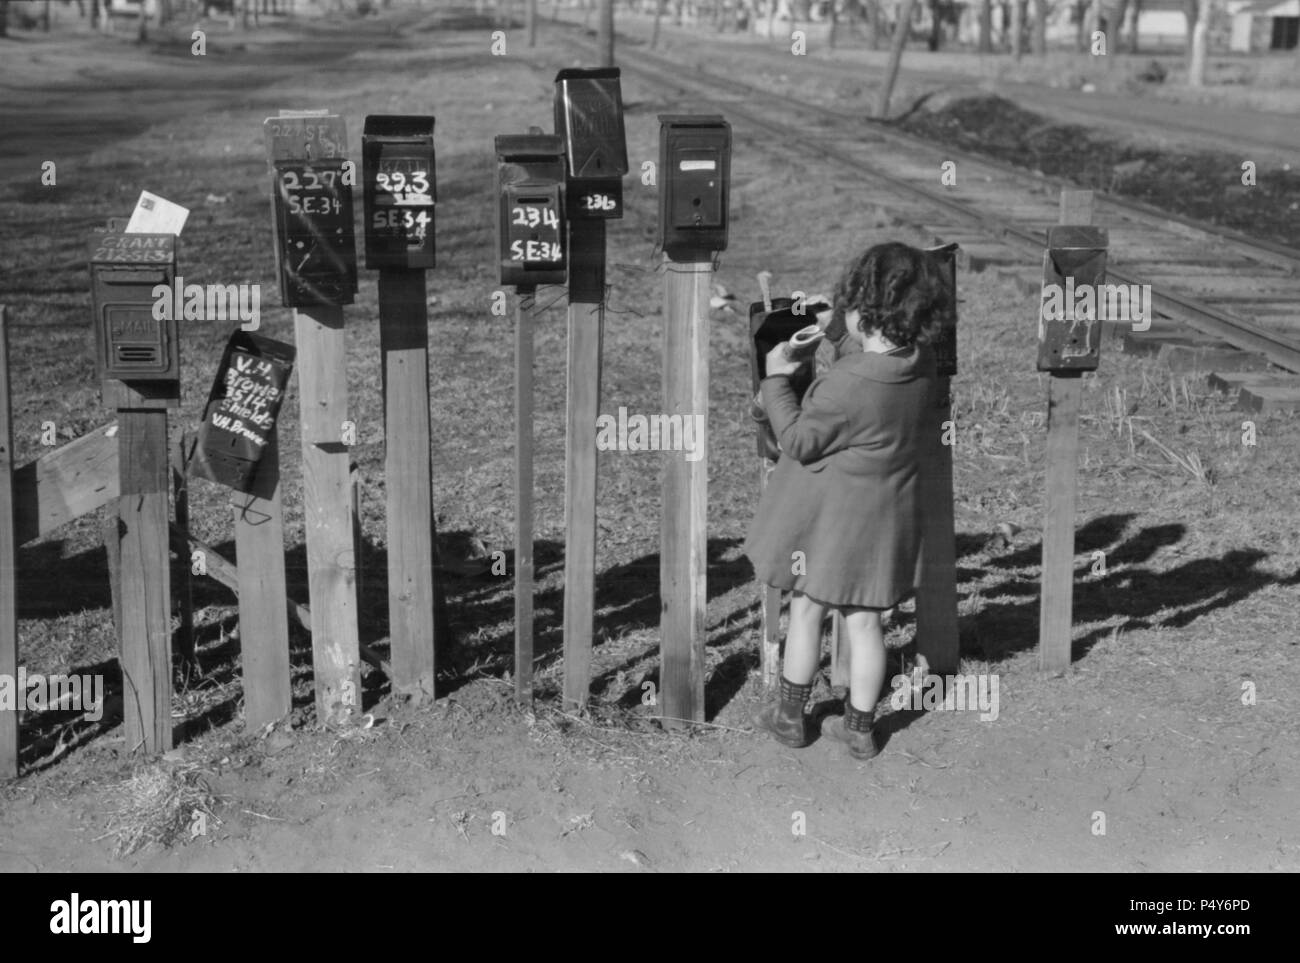 Little Girl Getting Mail from Mailbox, Suburb of Oklahoma City, Oklahoma, USA, Russell Lee, Farm Security Administration, February 1940 Stock Photo